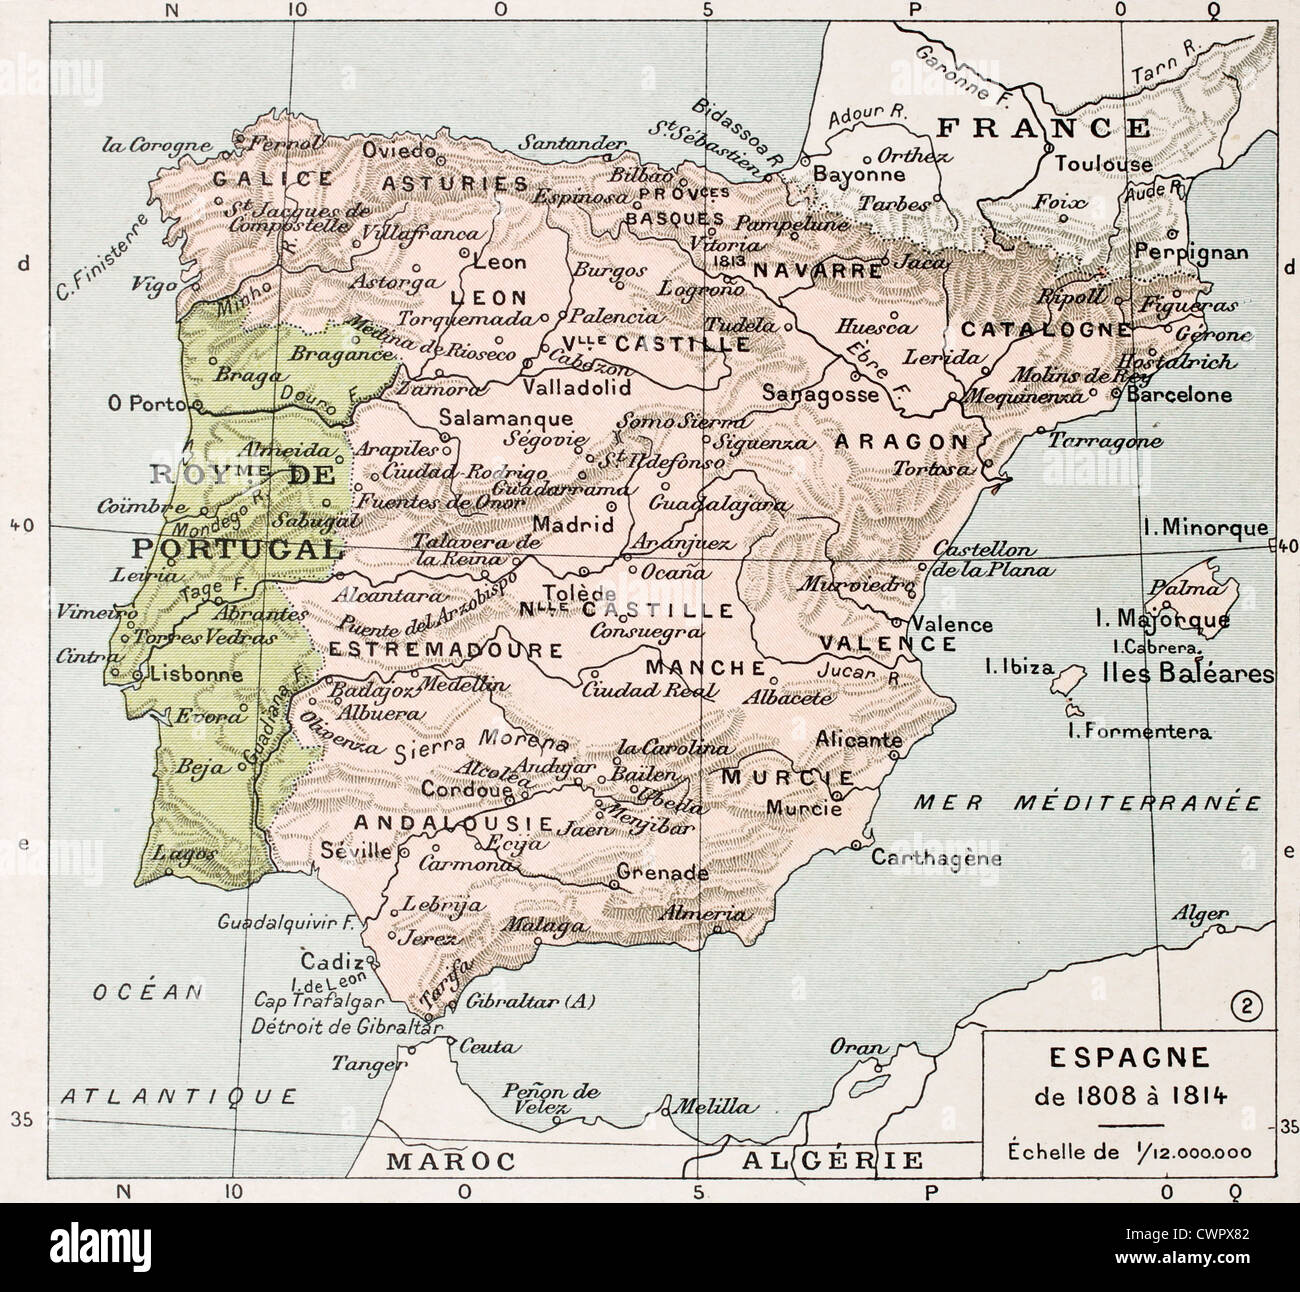 Spain between 1808 and 1814 Stock Photo